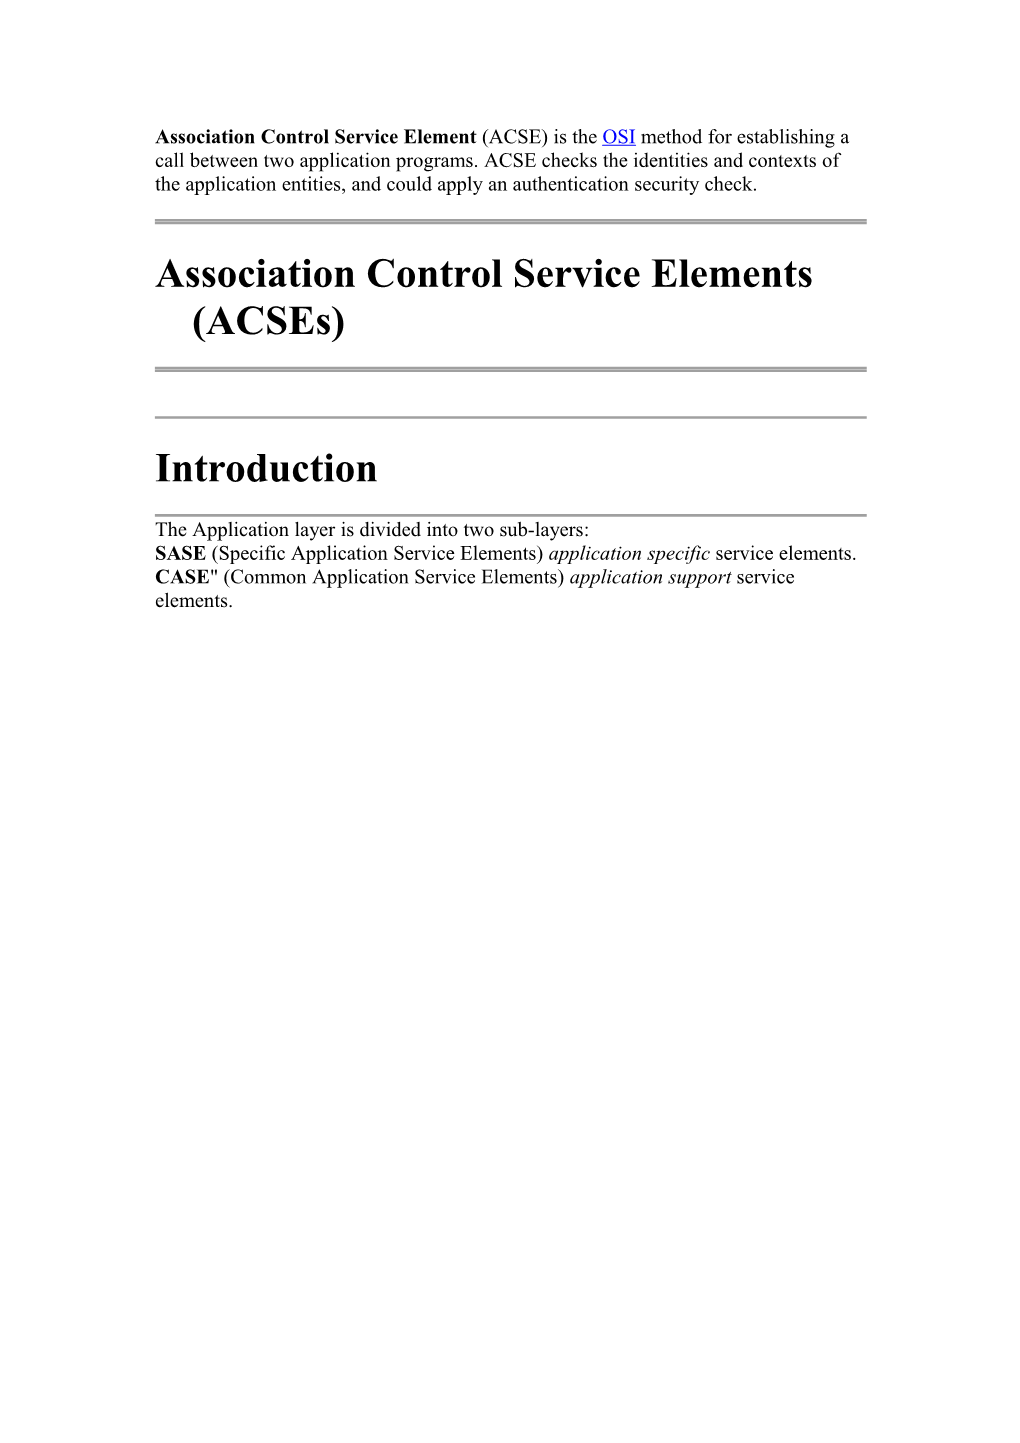 Association Control Service Element (ACSE) Is the OSI Method for Establishing a Call Between